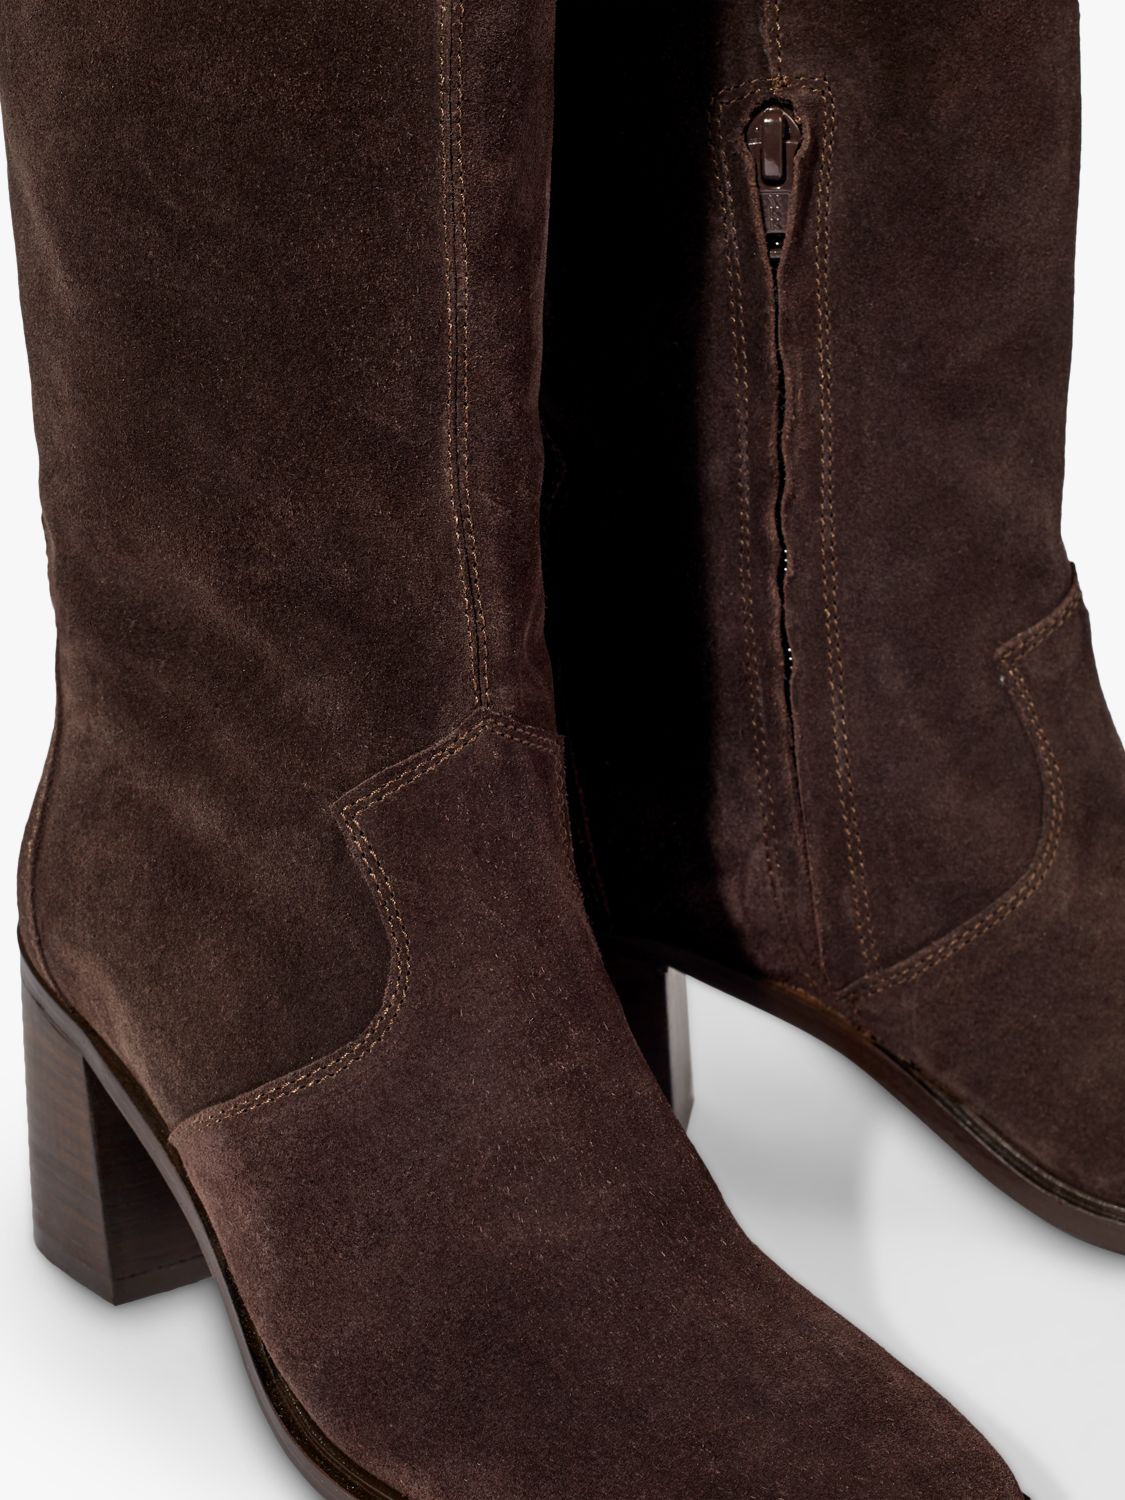 chocolate suede boots